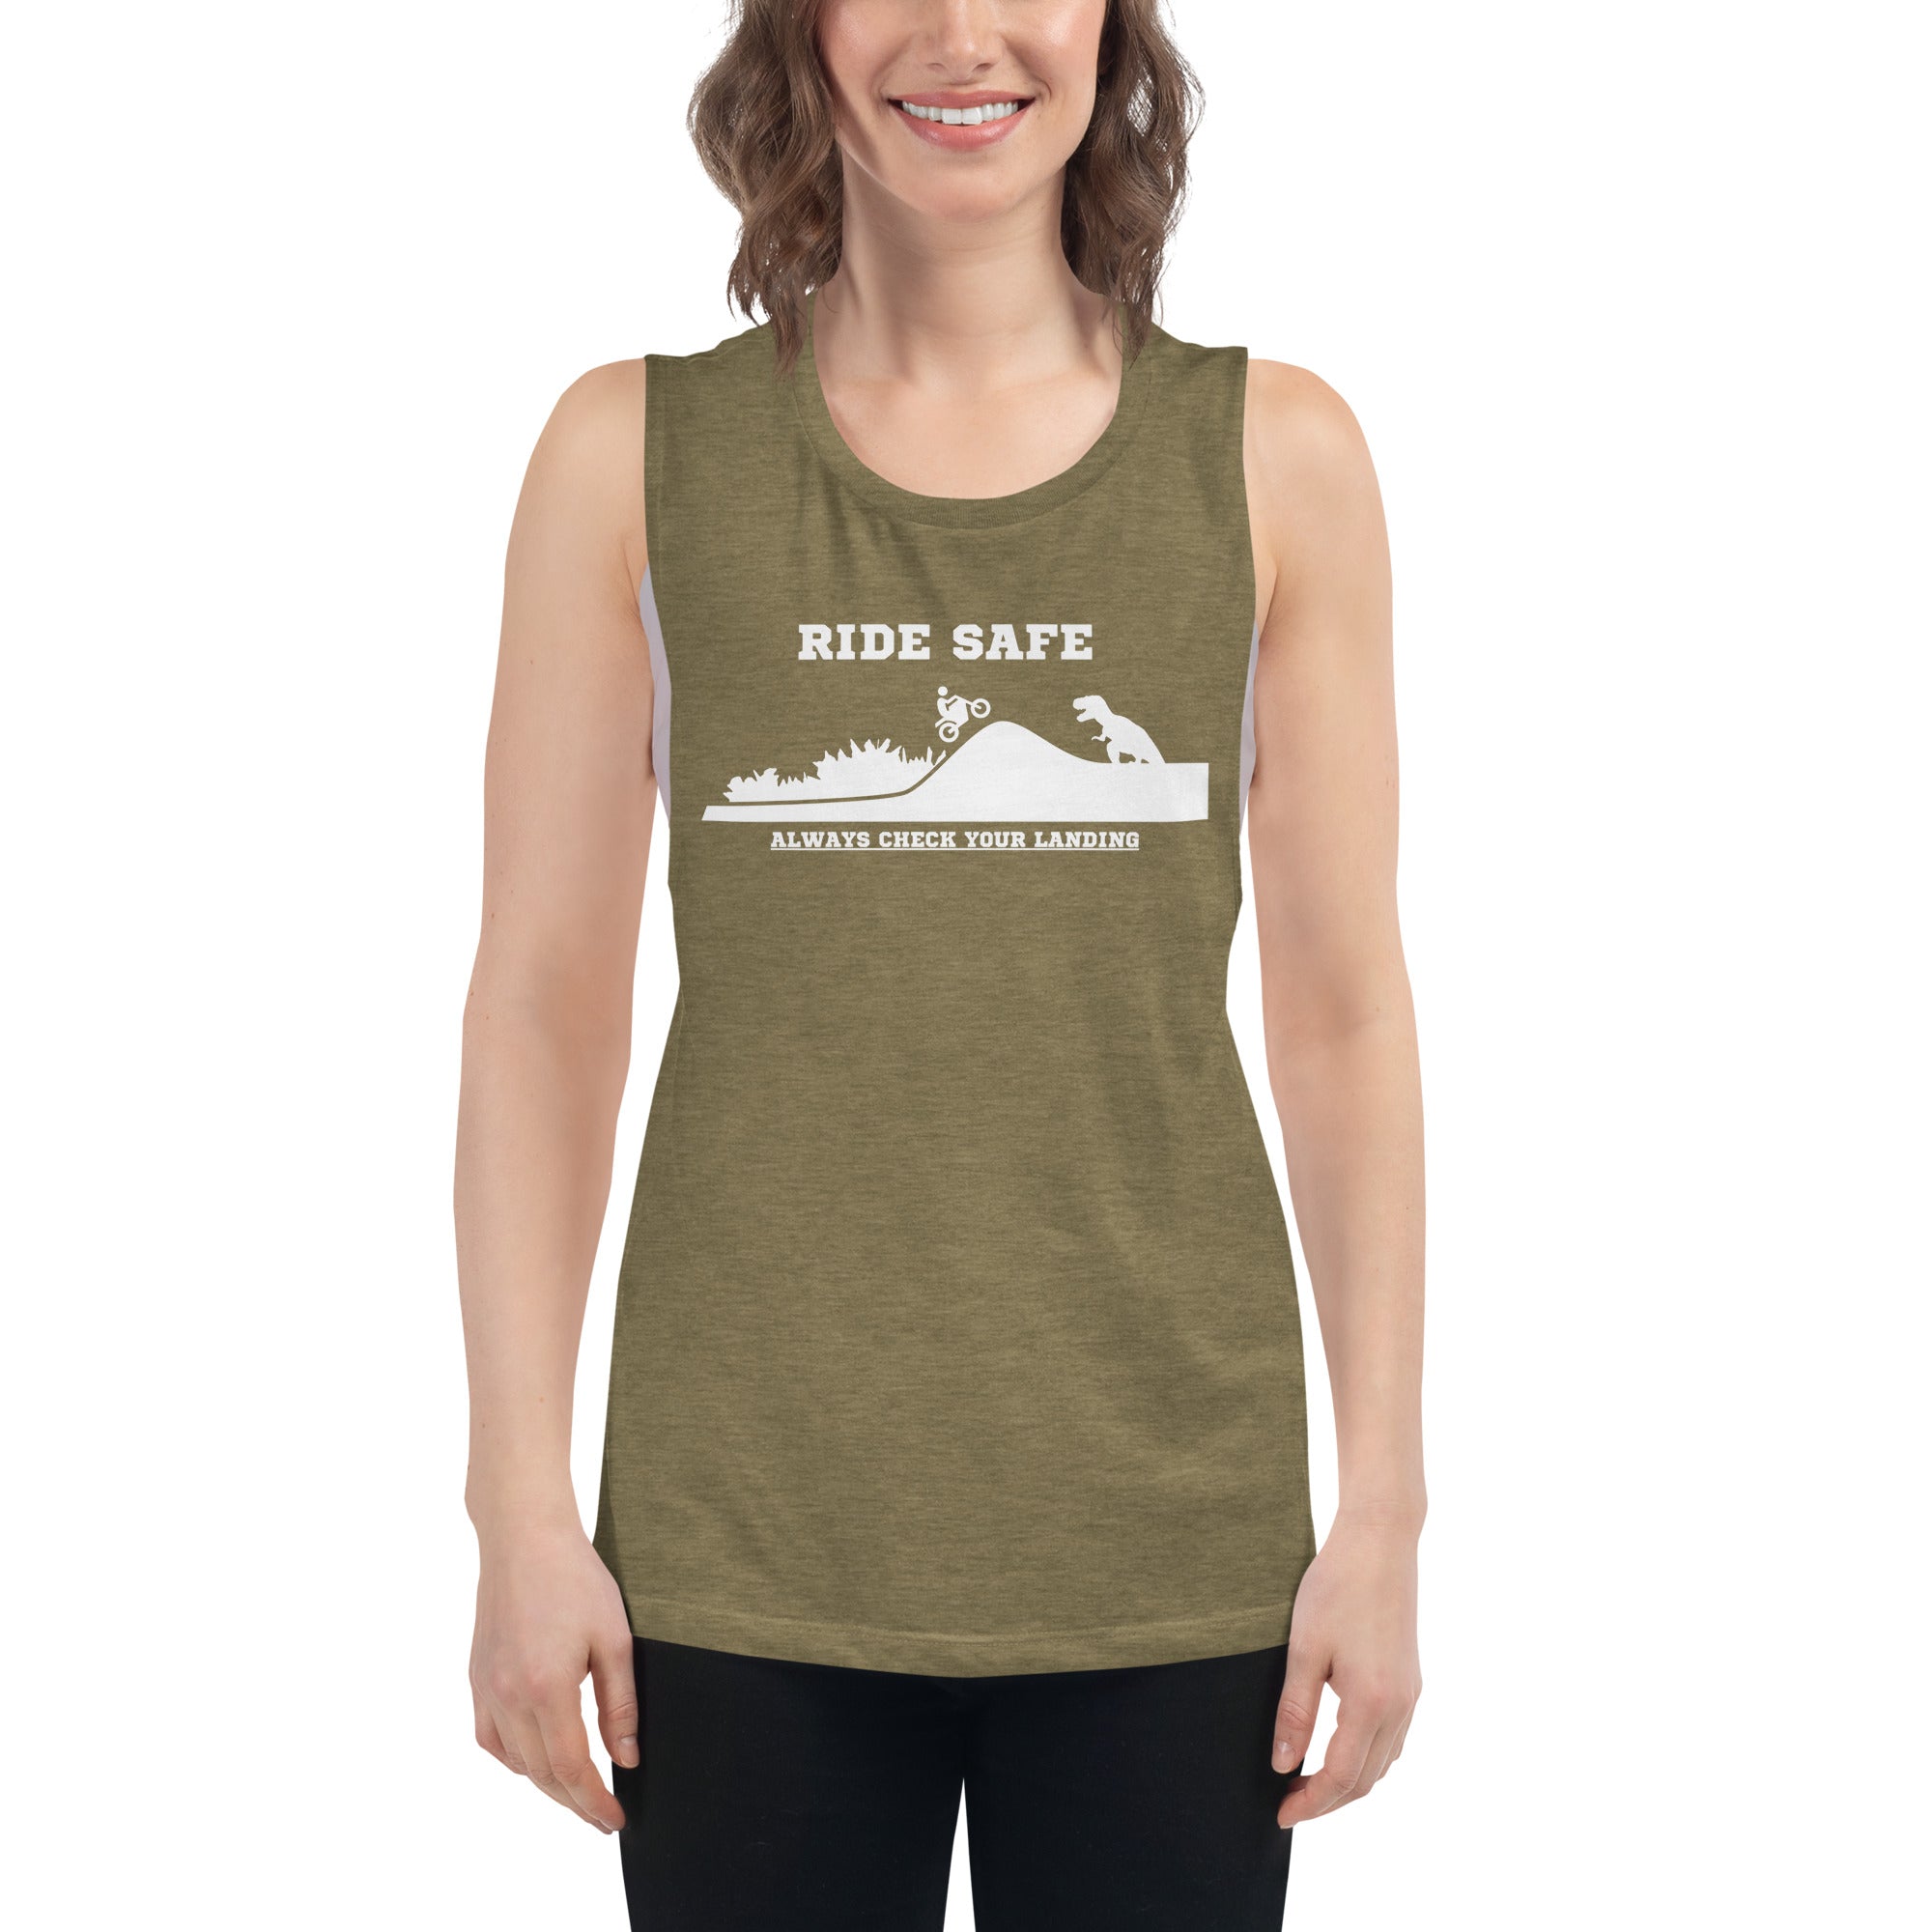 Ride Safe Check Your Landing Women's Muscle Tank